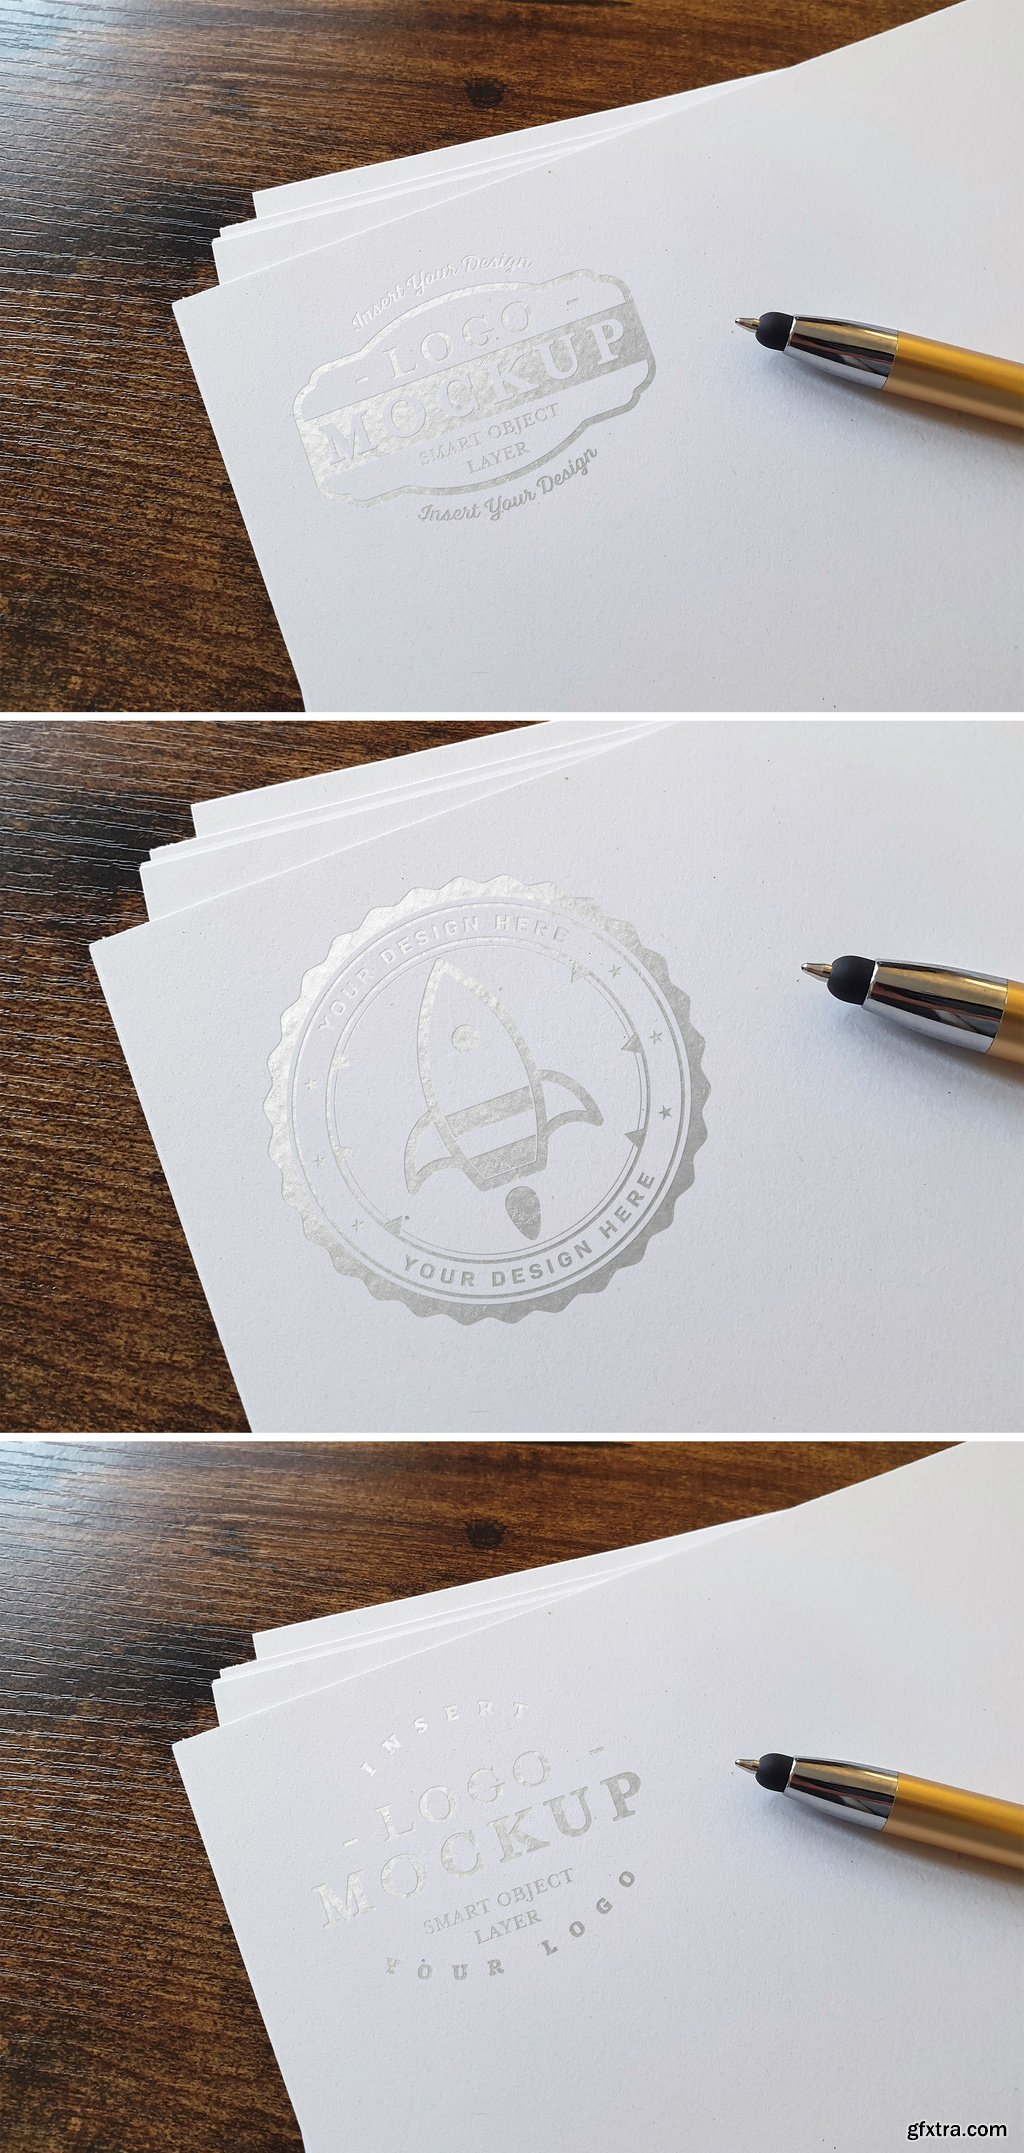 Download Embossed Shiny Logo Mockup on Paper Stack 315396040 » GFxtra